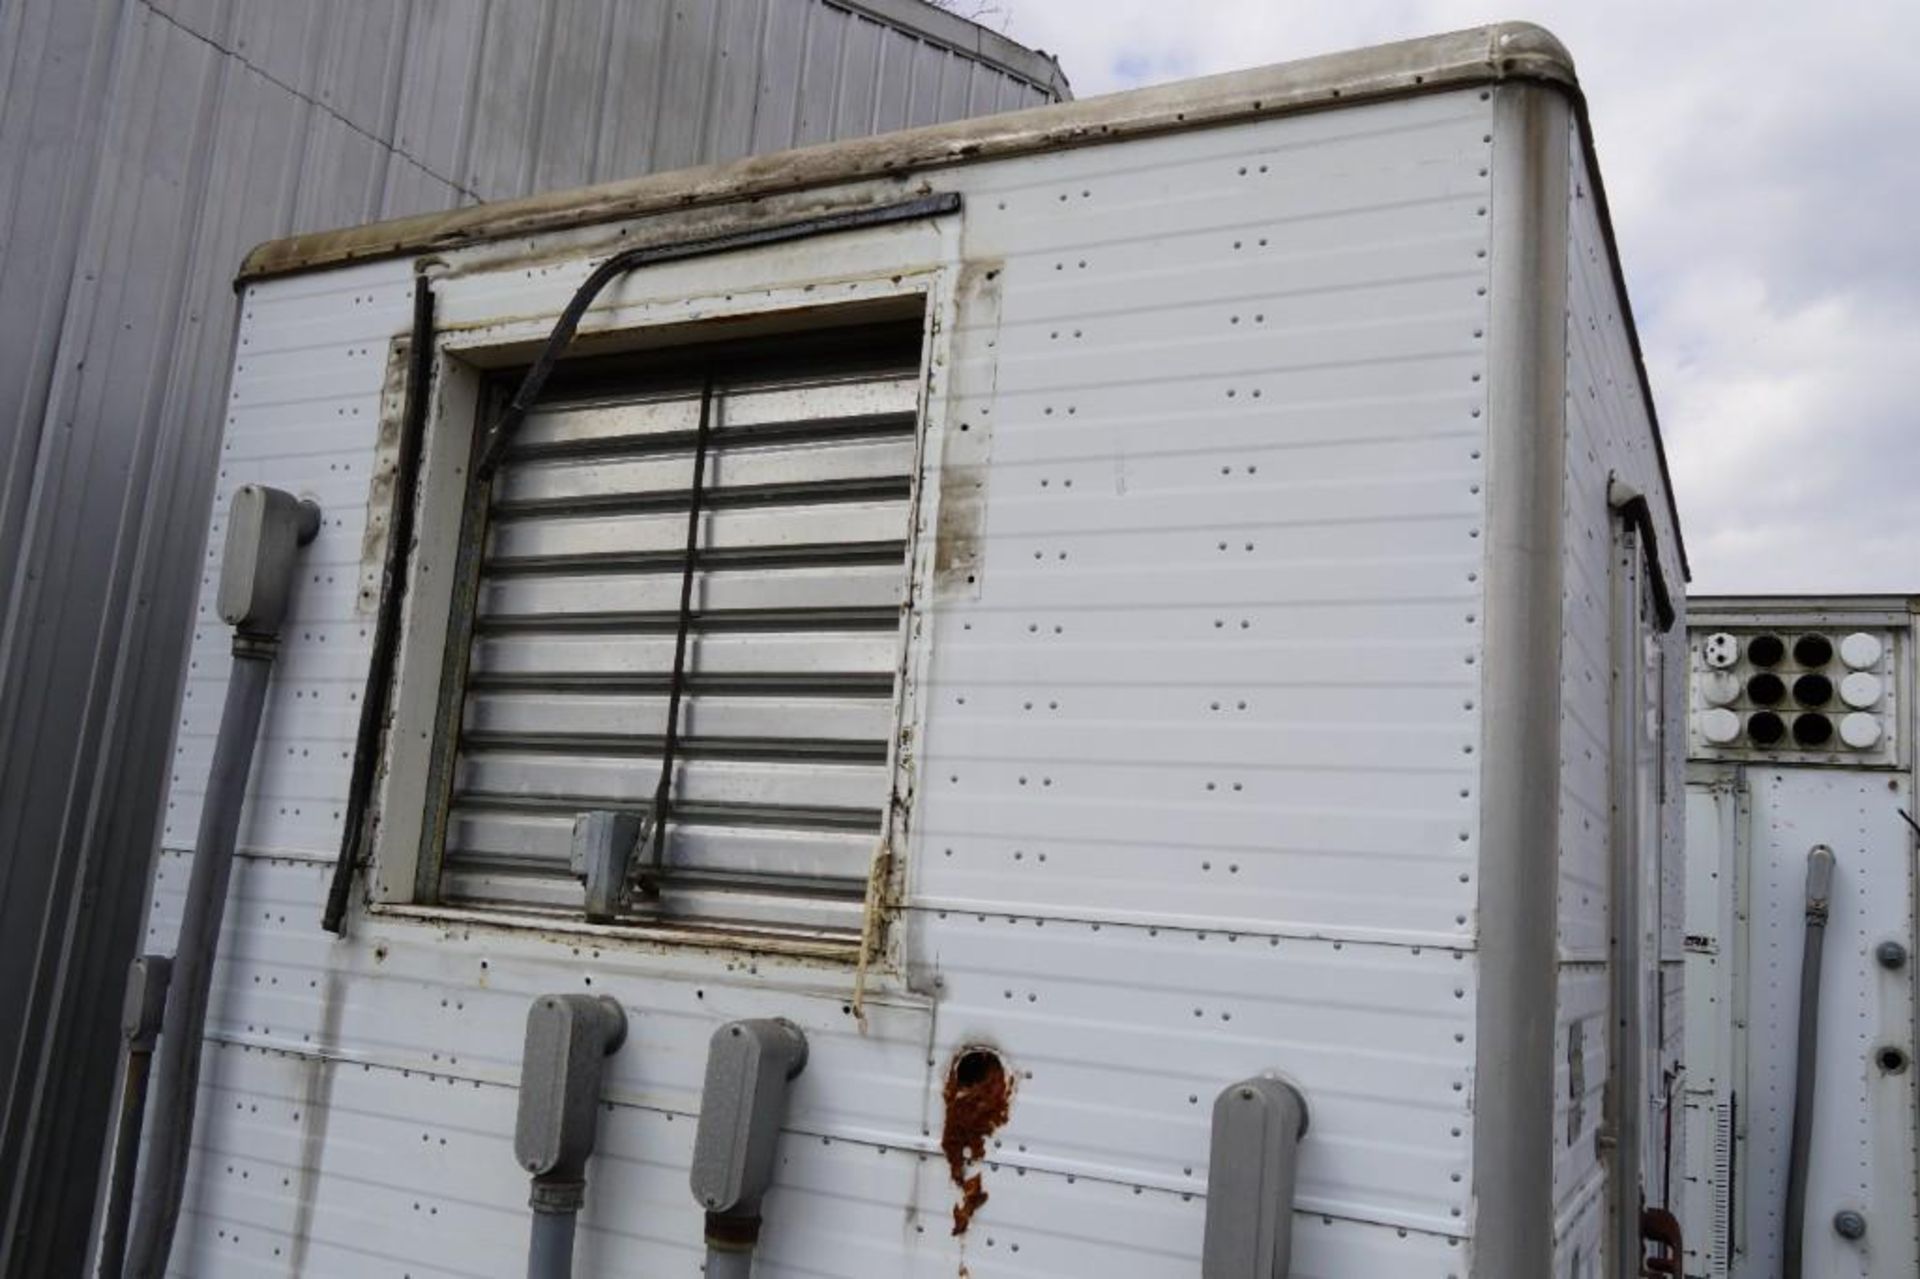 Microvan Mobile International Insulated Aluminum Mobile Building - Image 6 of 16